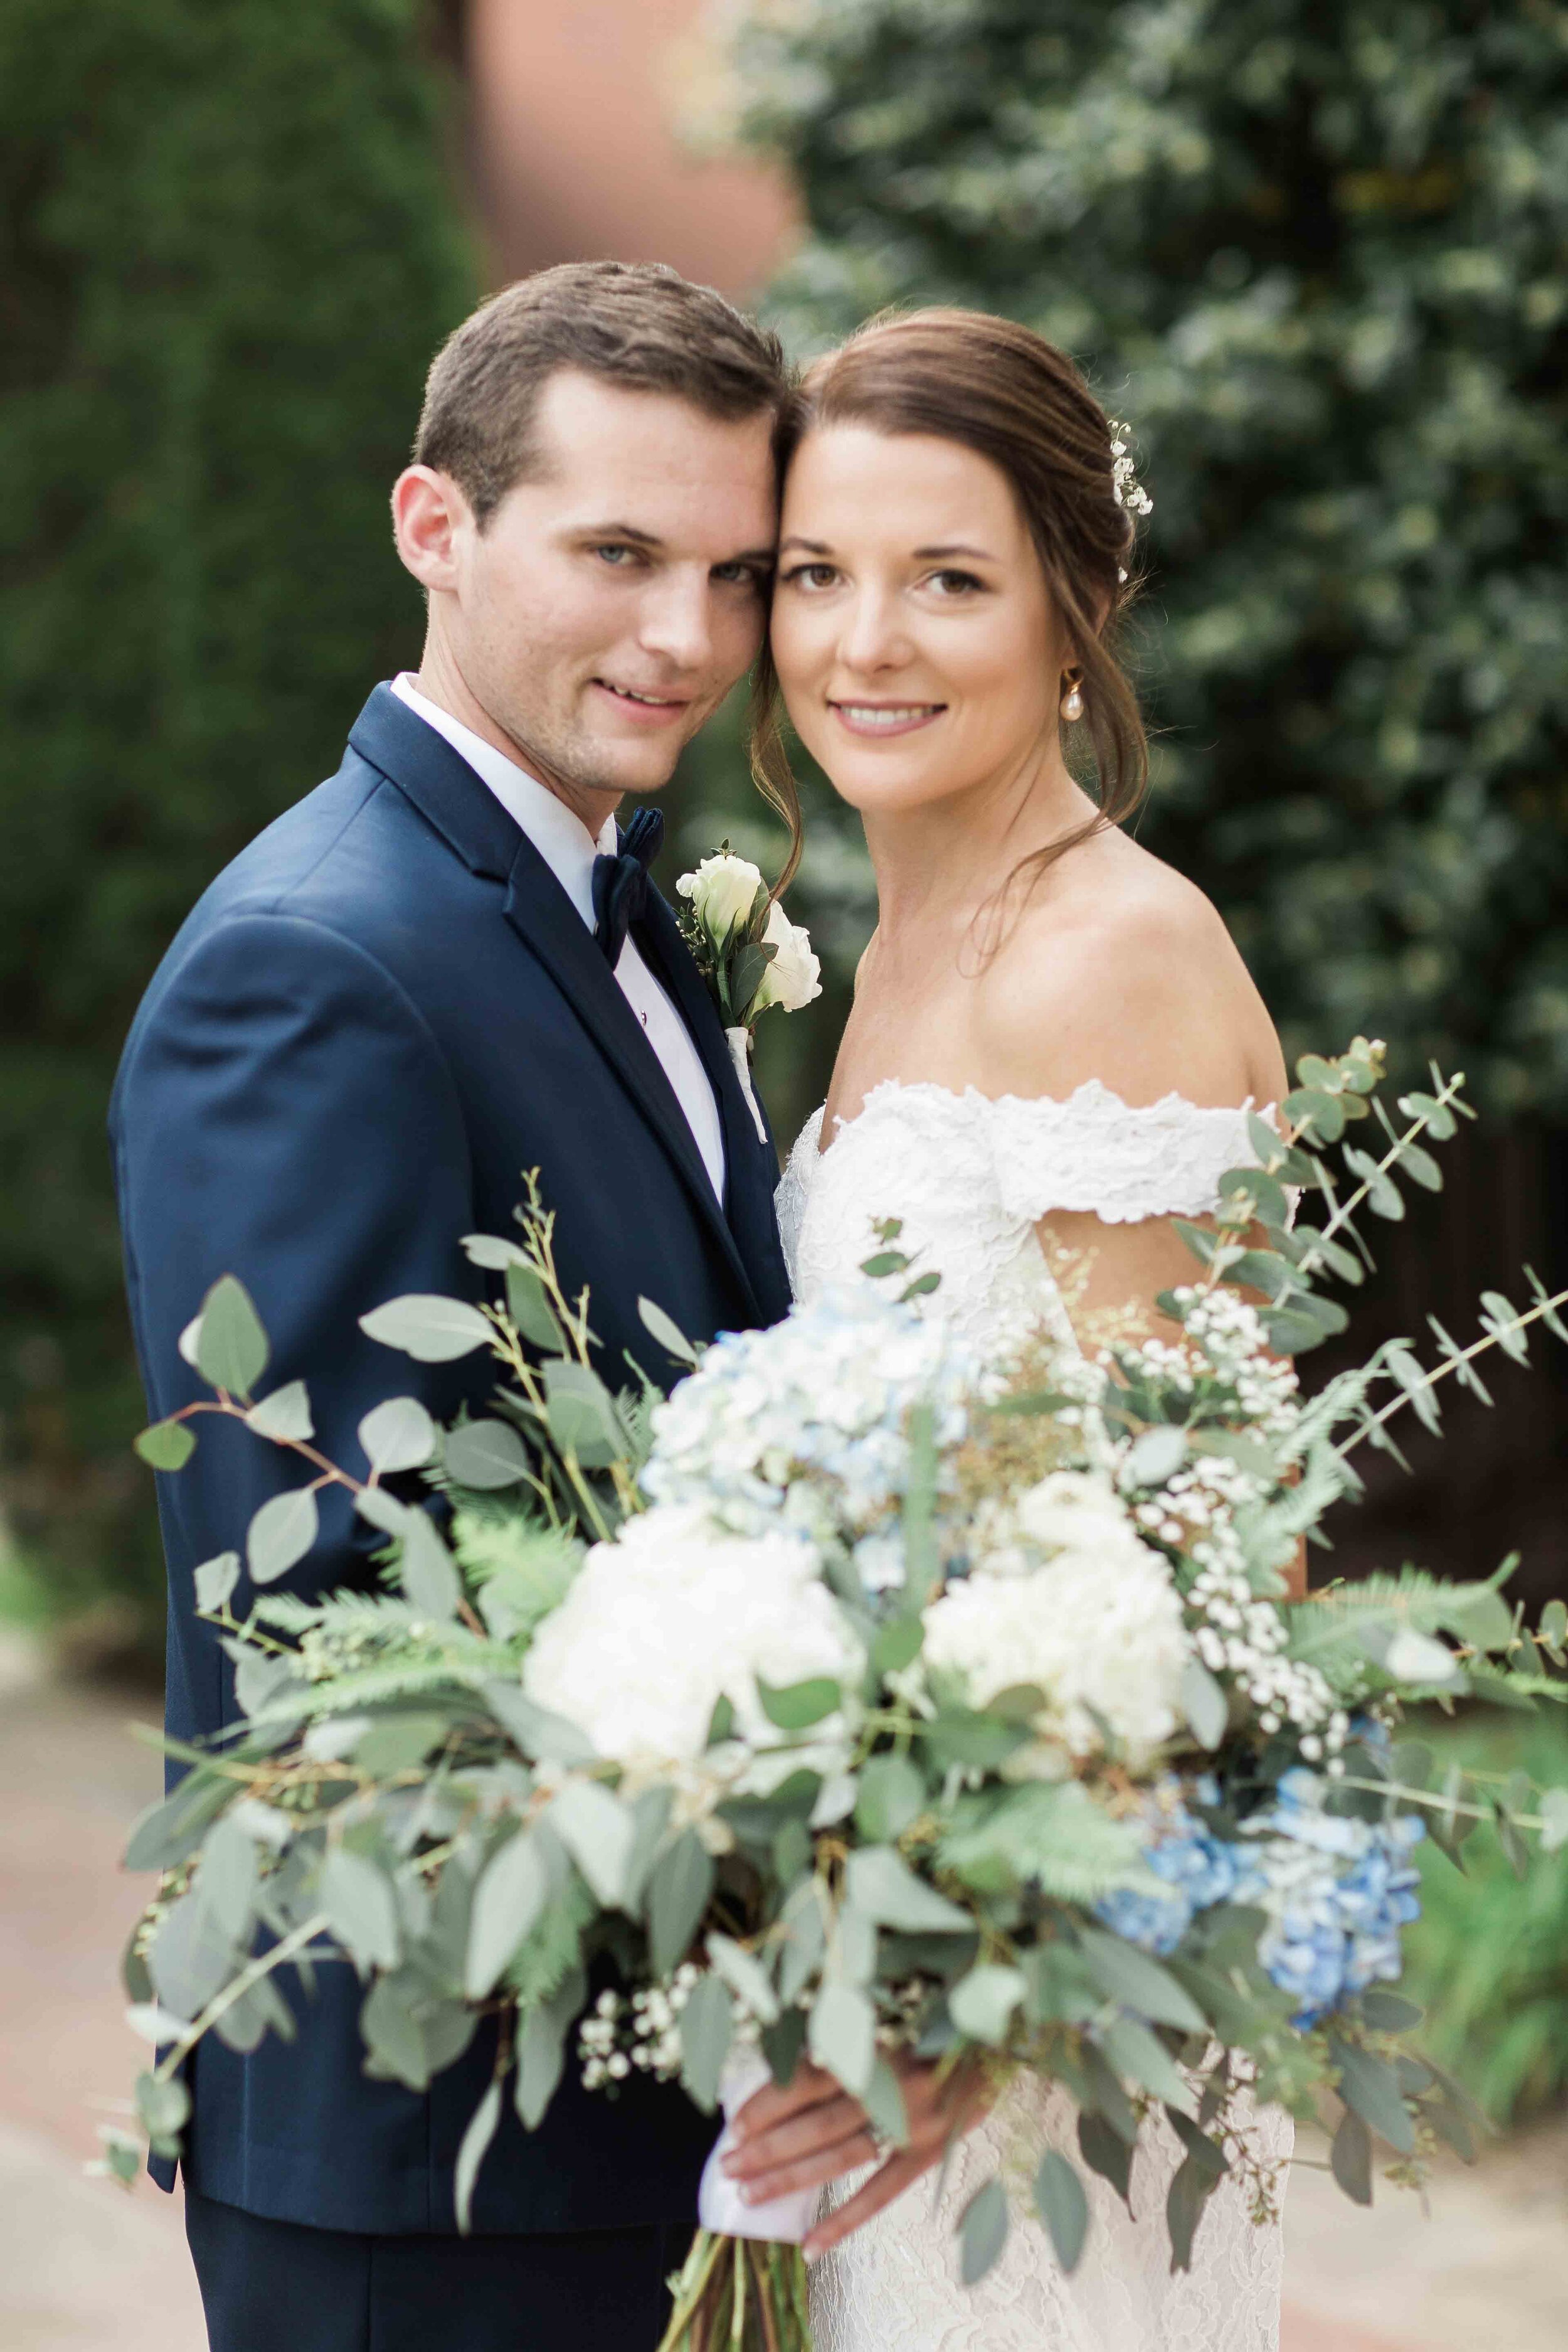 Roswell Historic Cottage bride and groom with large blue and white bouquet